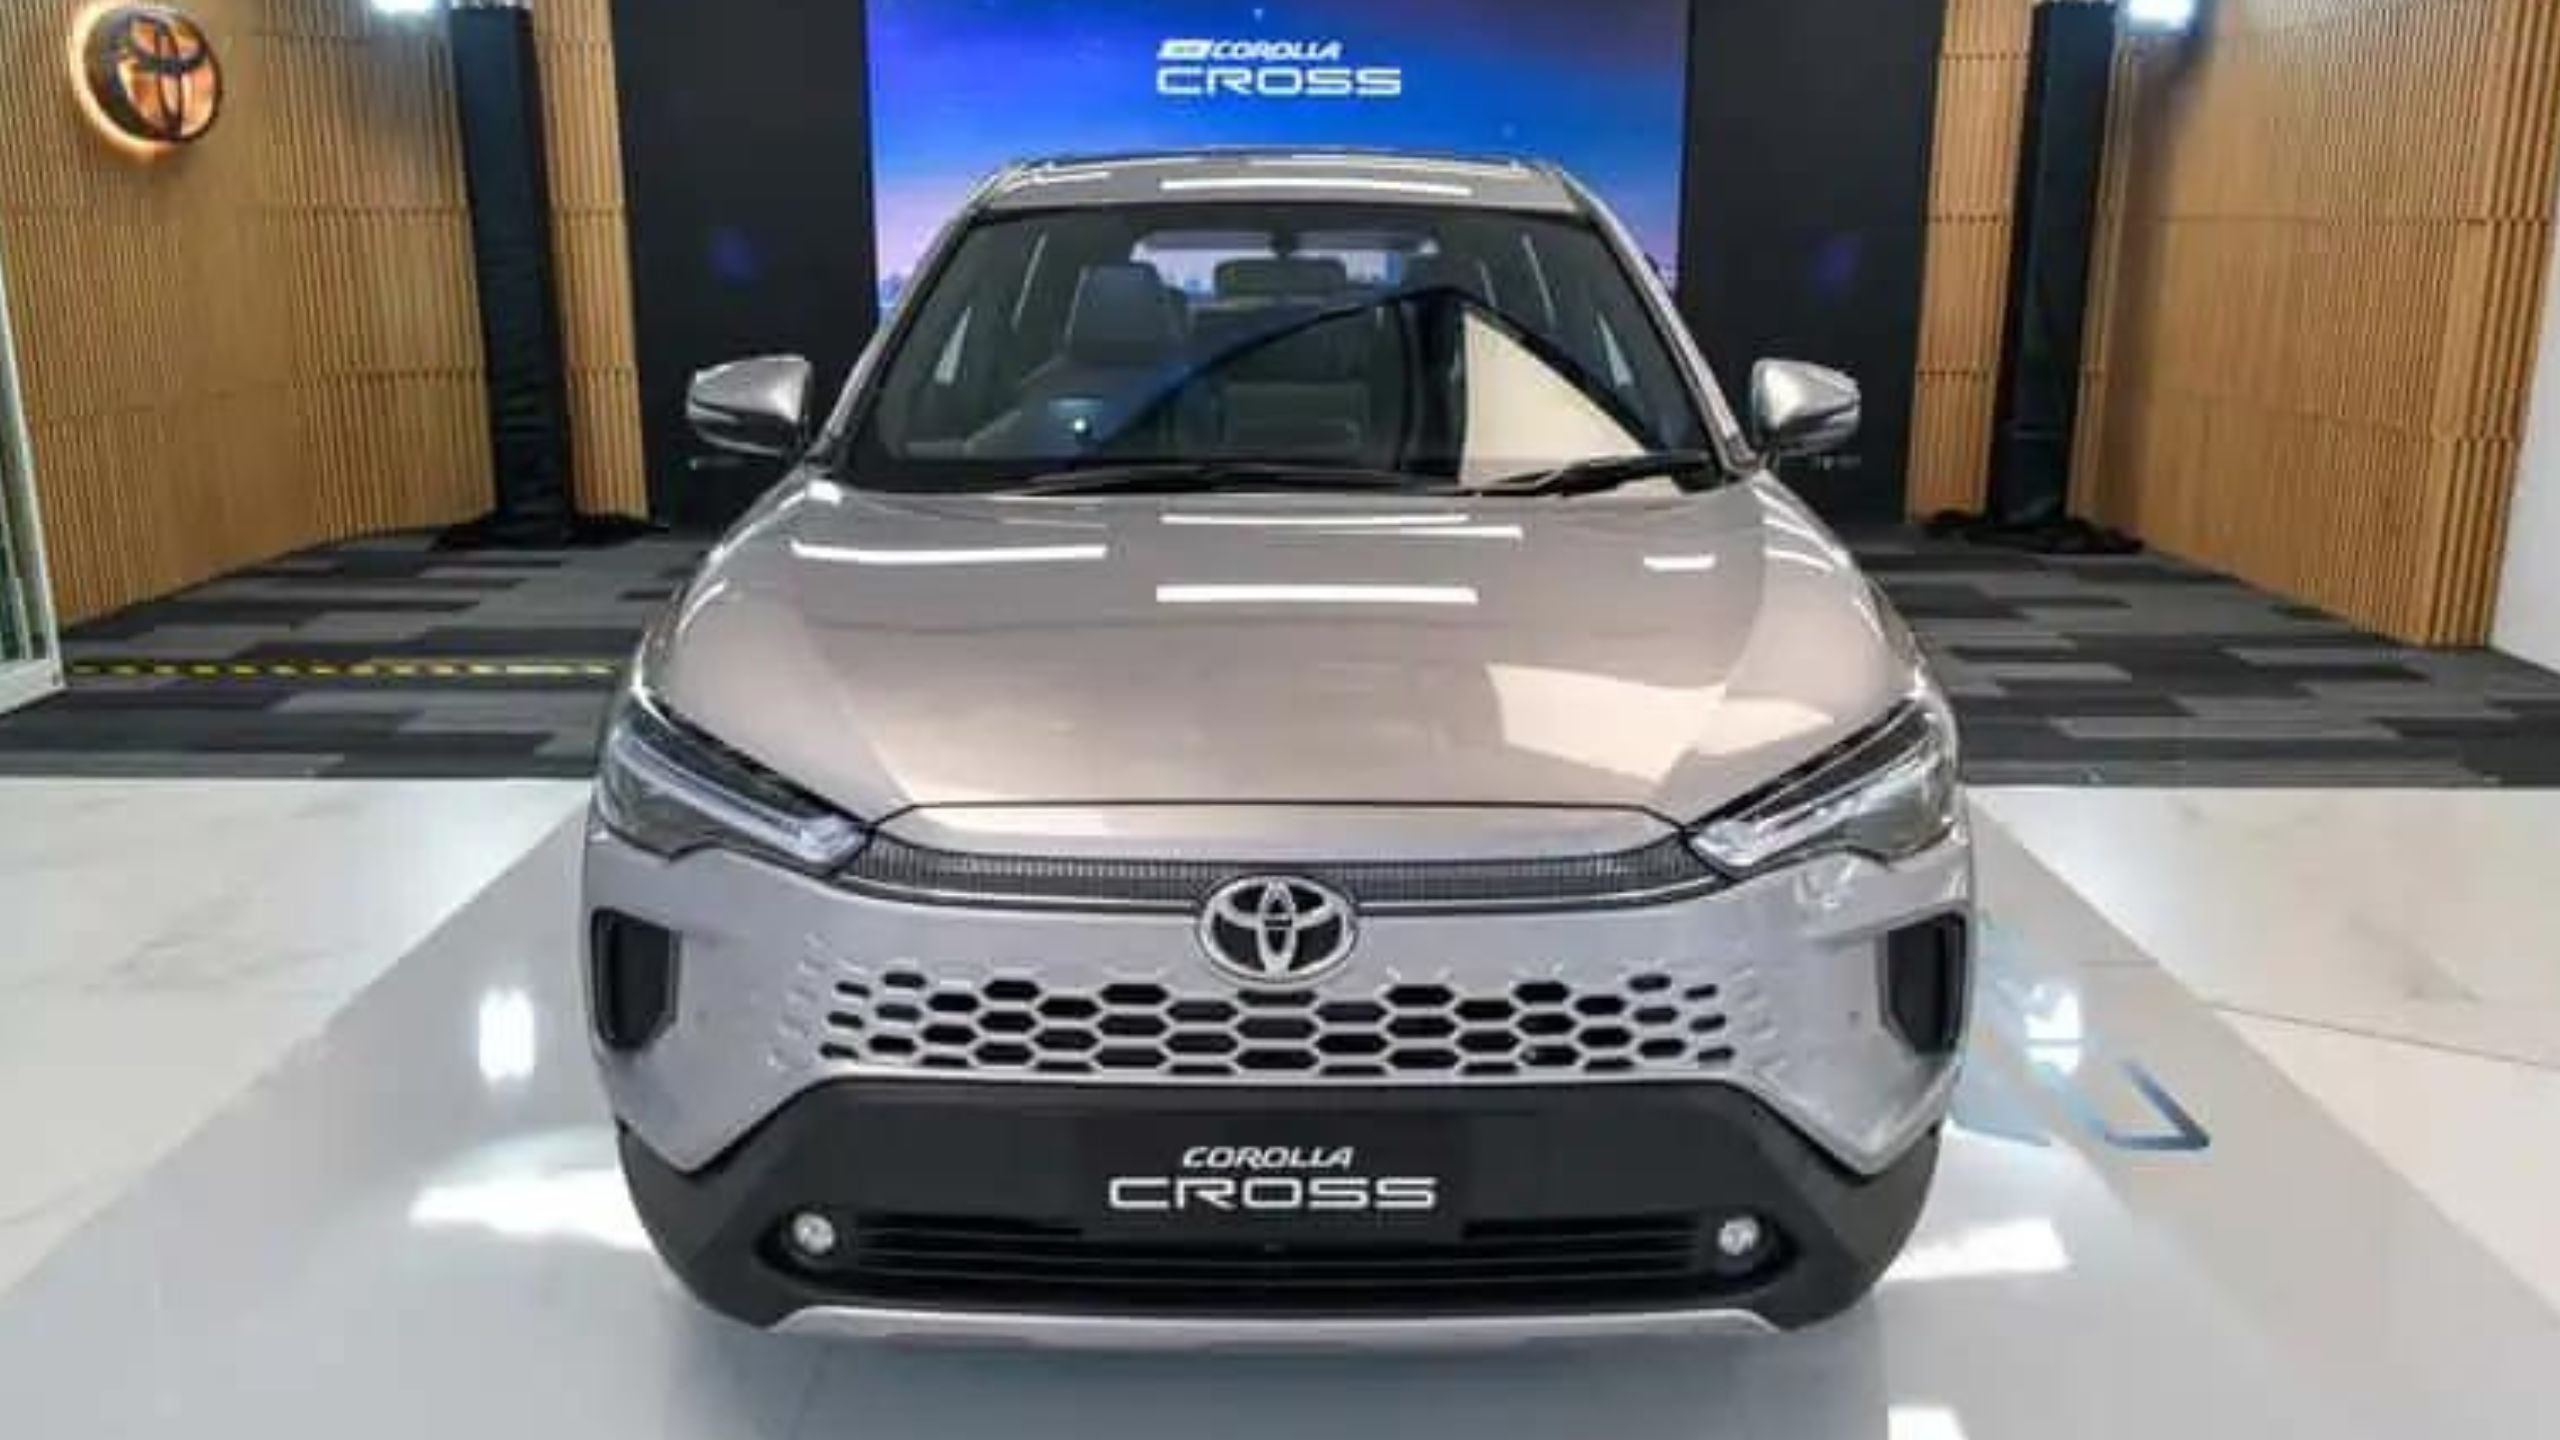 Toyota Reveals Refreshed Corolla Cross